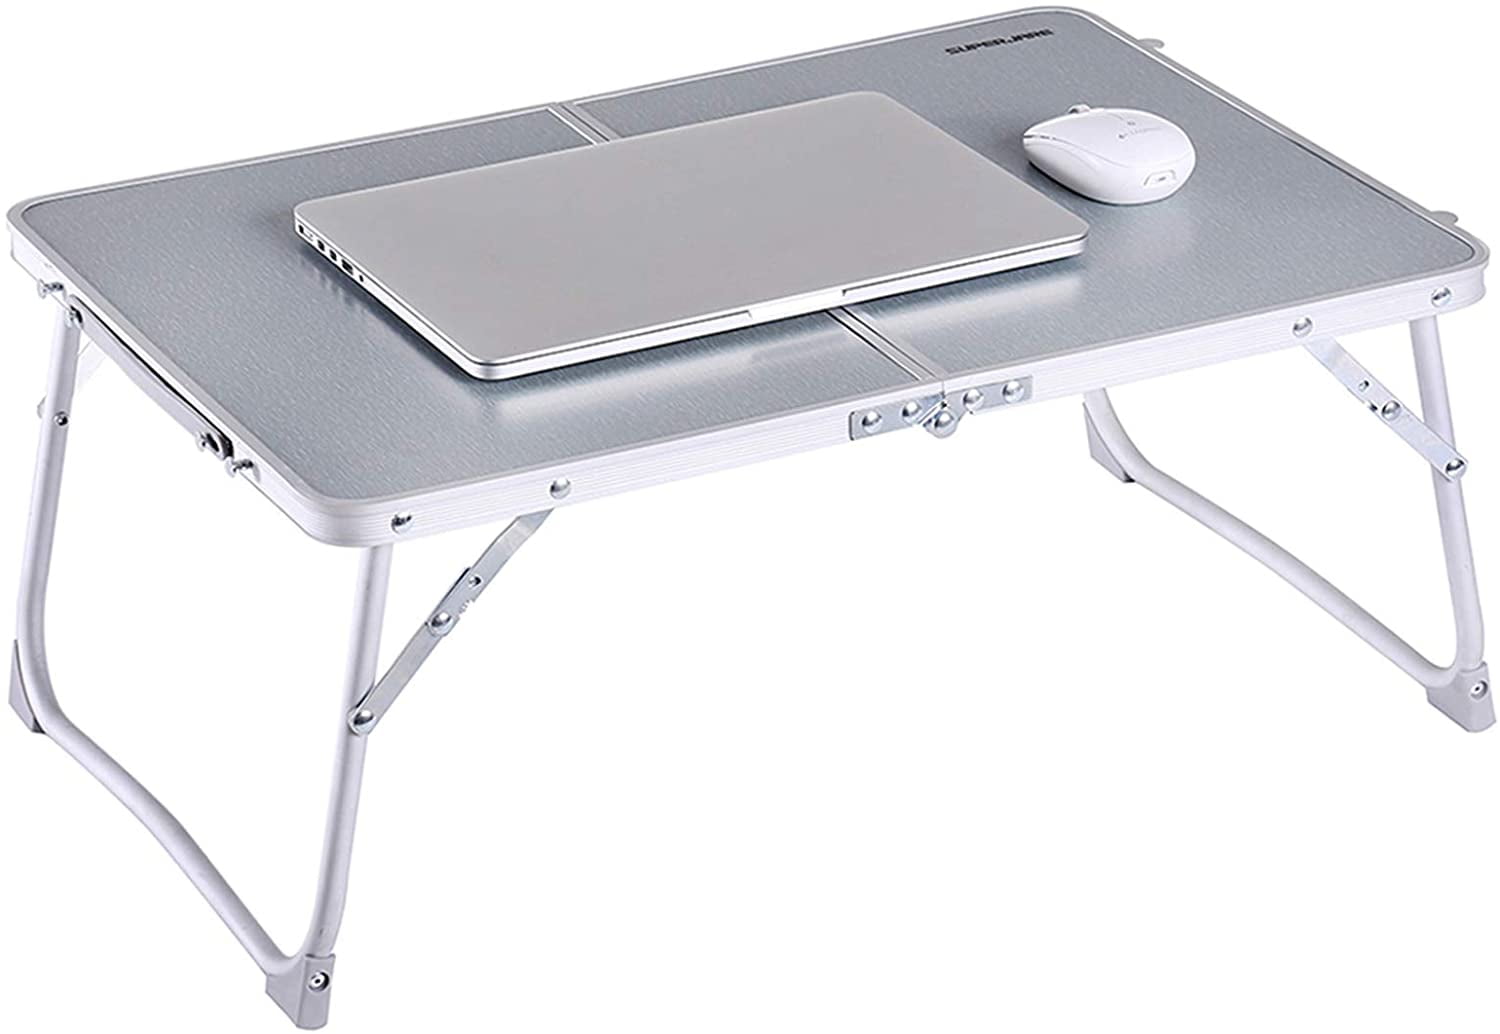 Portable Folding Table Outdoor Picnic Table Easy to Carry MEI Computer armoires Bed Laptop Table